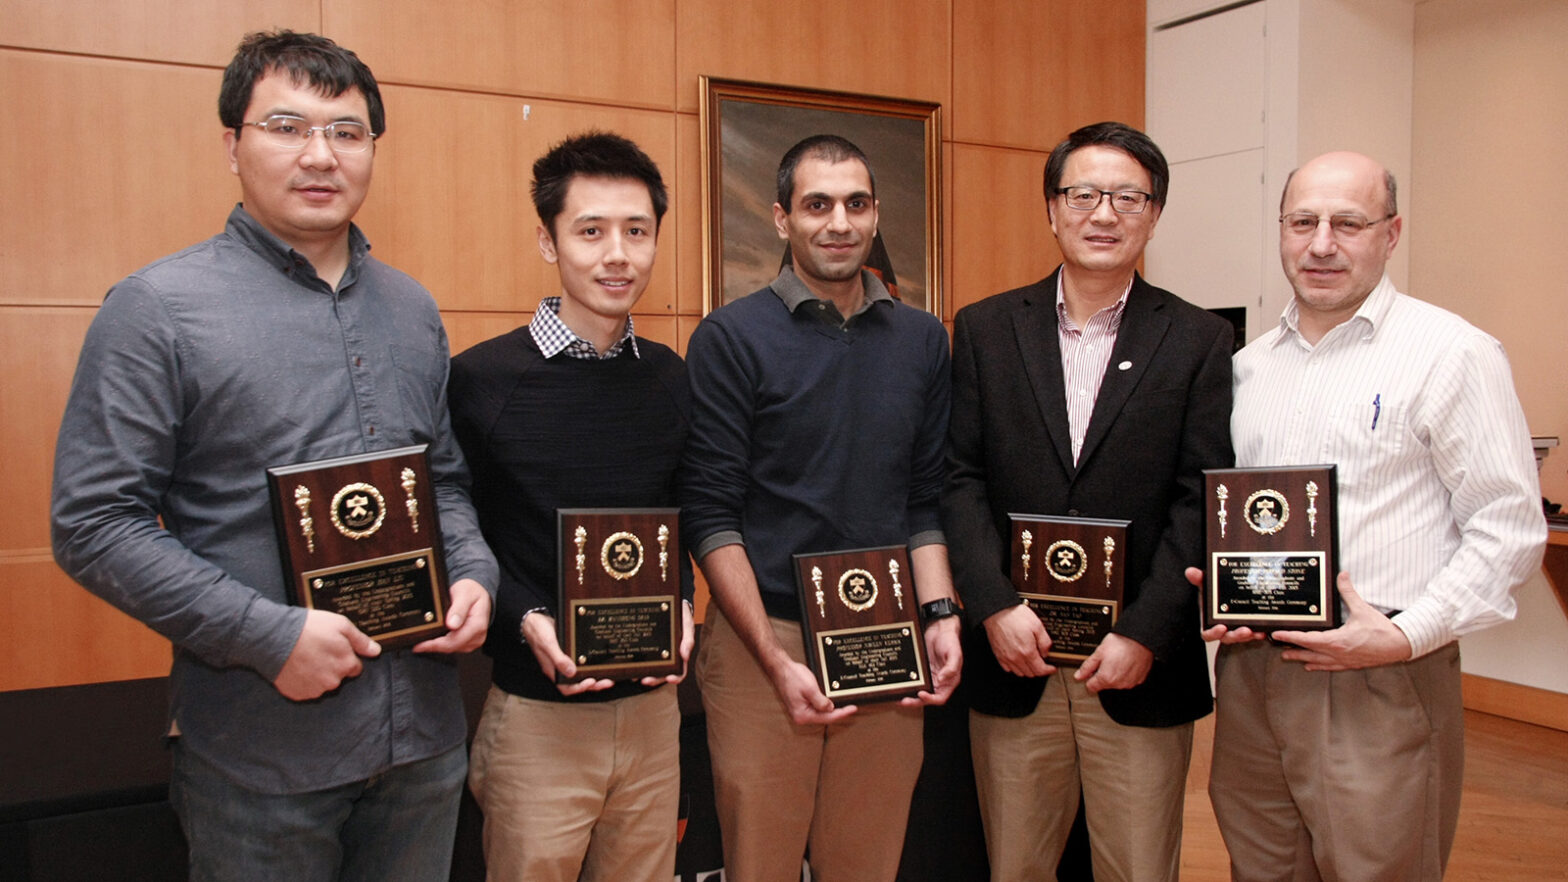 Five faculty members pose with teaching awards